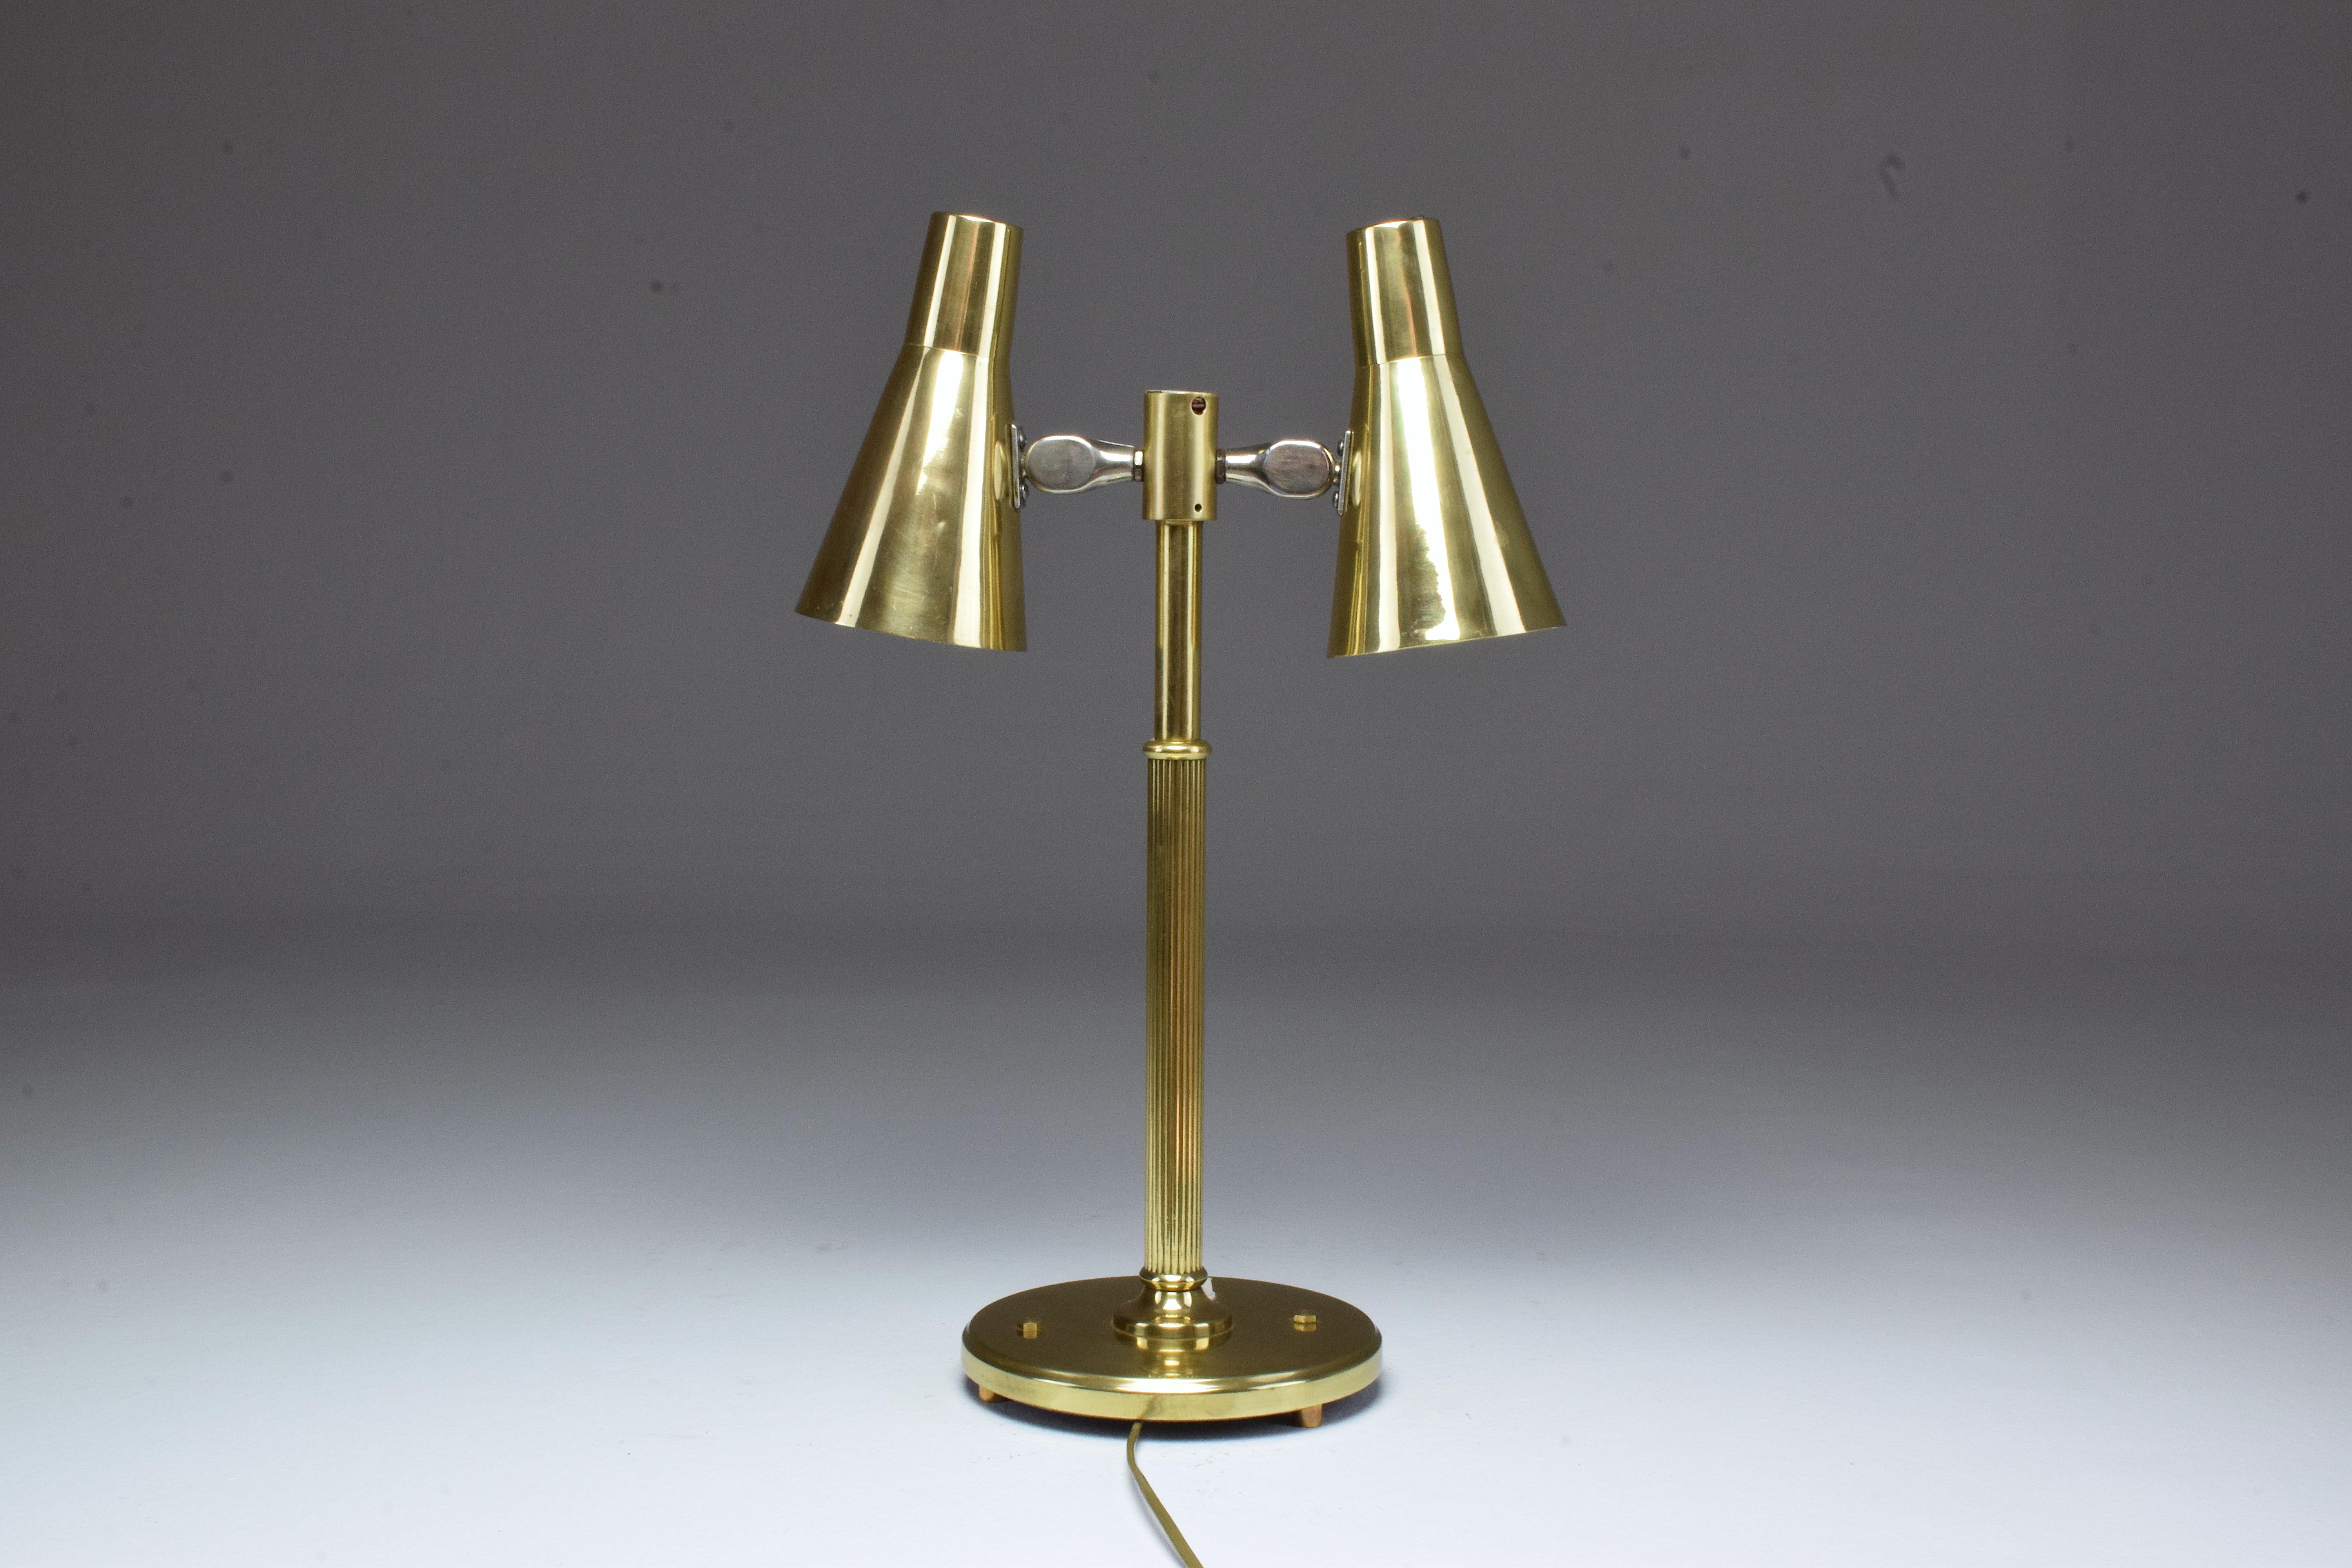 A 20th-century vintage Norwegian table lamp in solid polished gold brass designed with two articulating shade, signed by the manufacturer Sønnico, circa 1960s.

Spirit Gallery is an exhibition space and an online destination established by